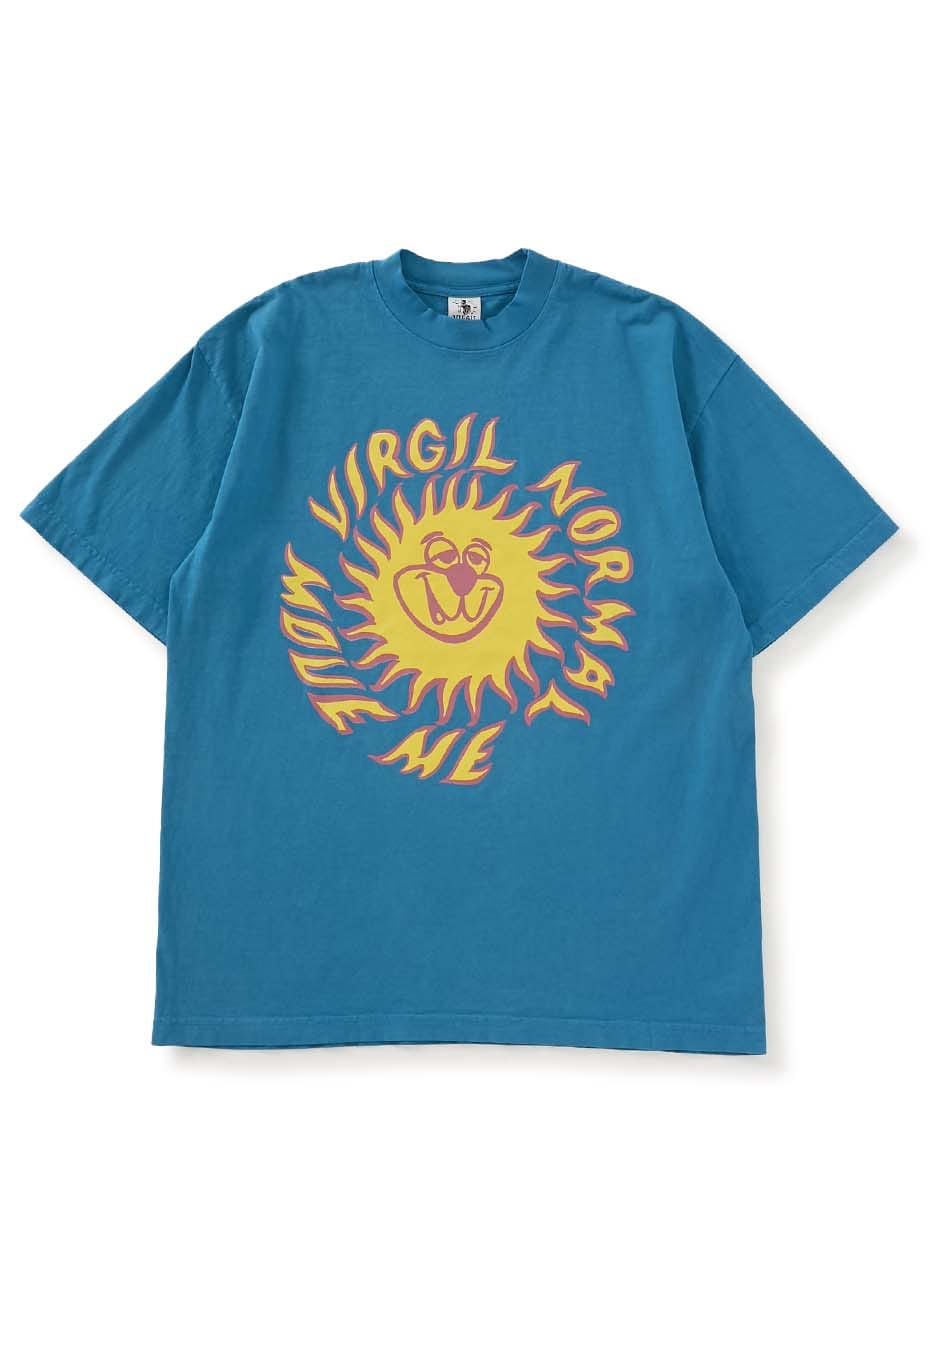 VIRGIL NORMAL MOVE ME Tシャツ